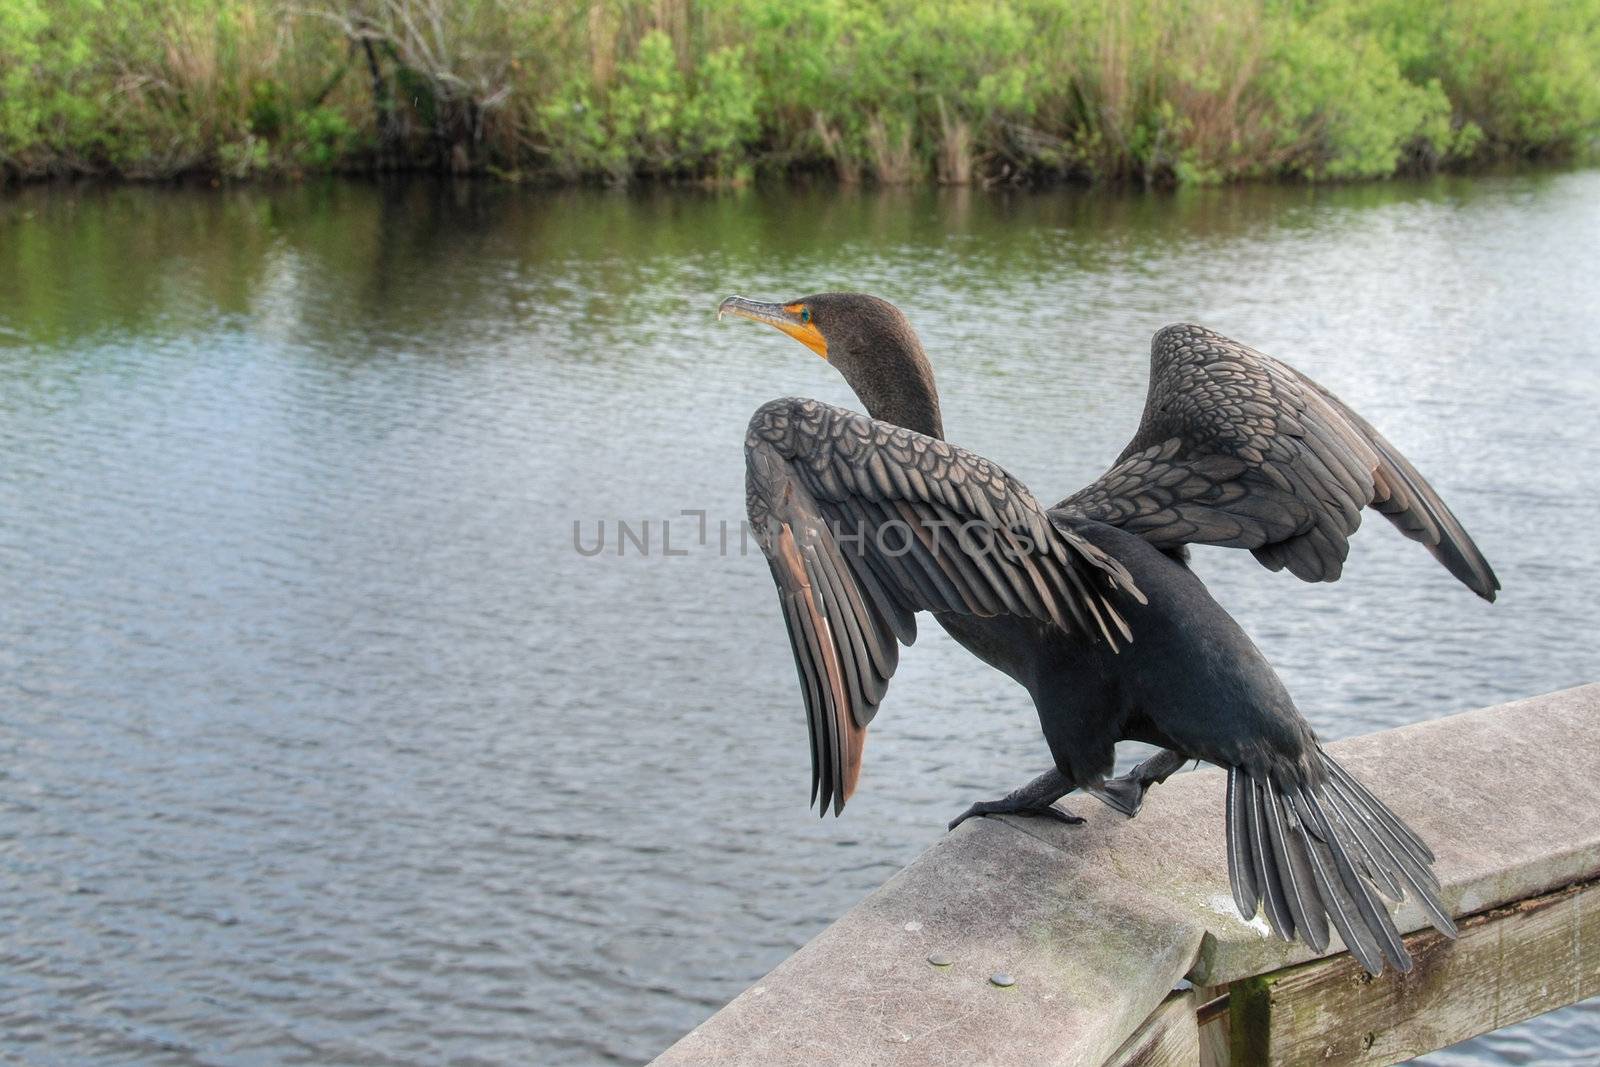 A bird trying to take off in the everglades